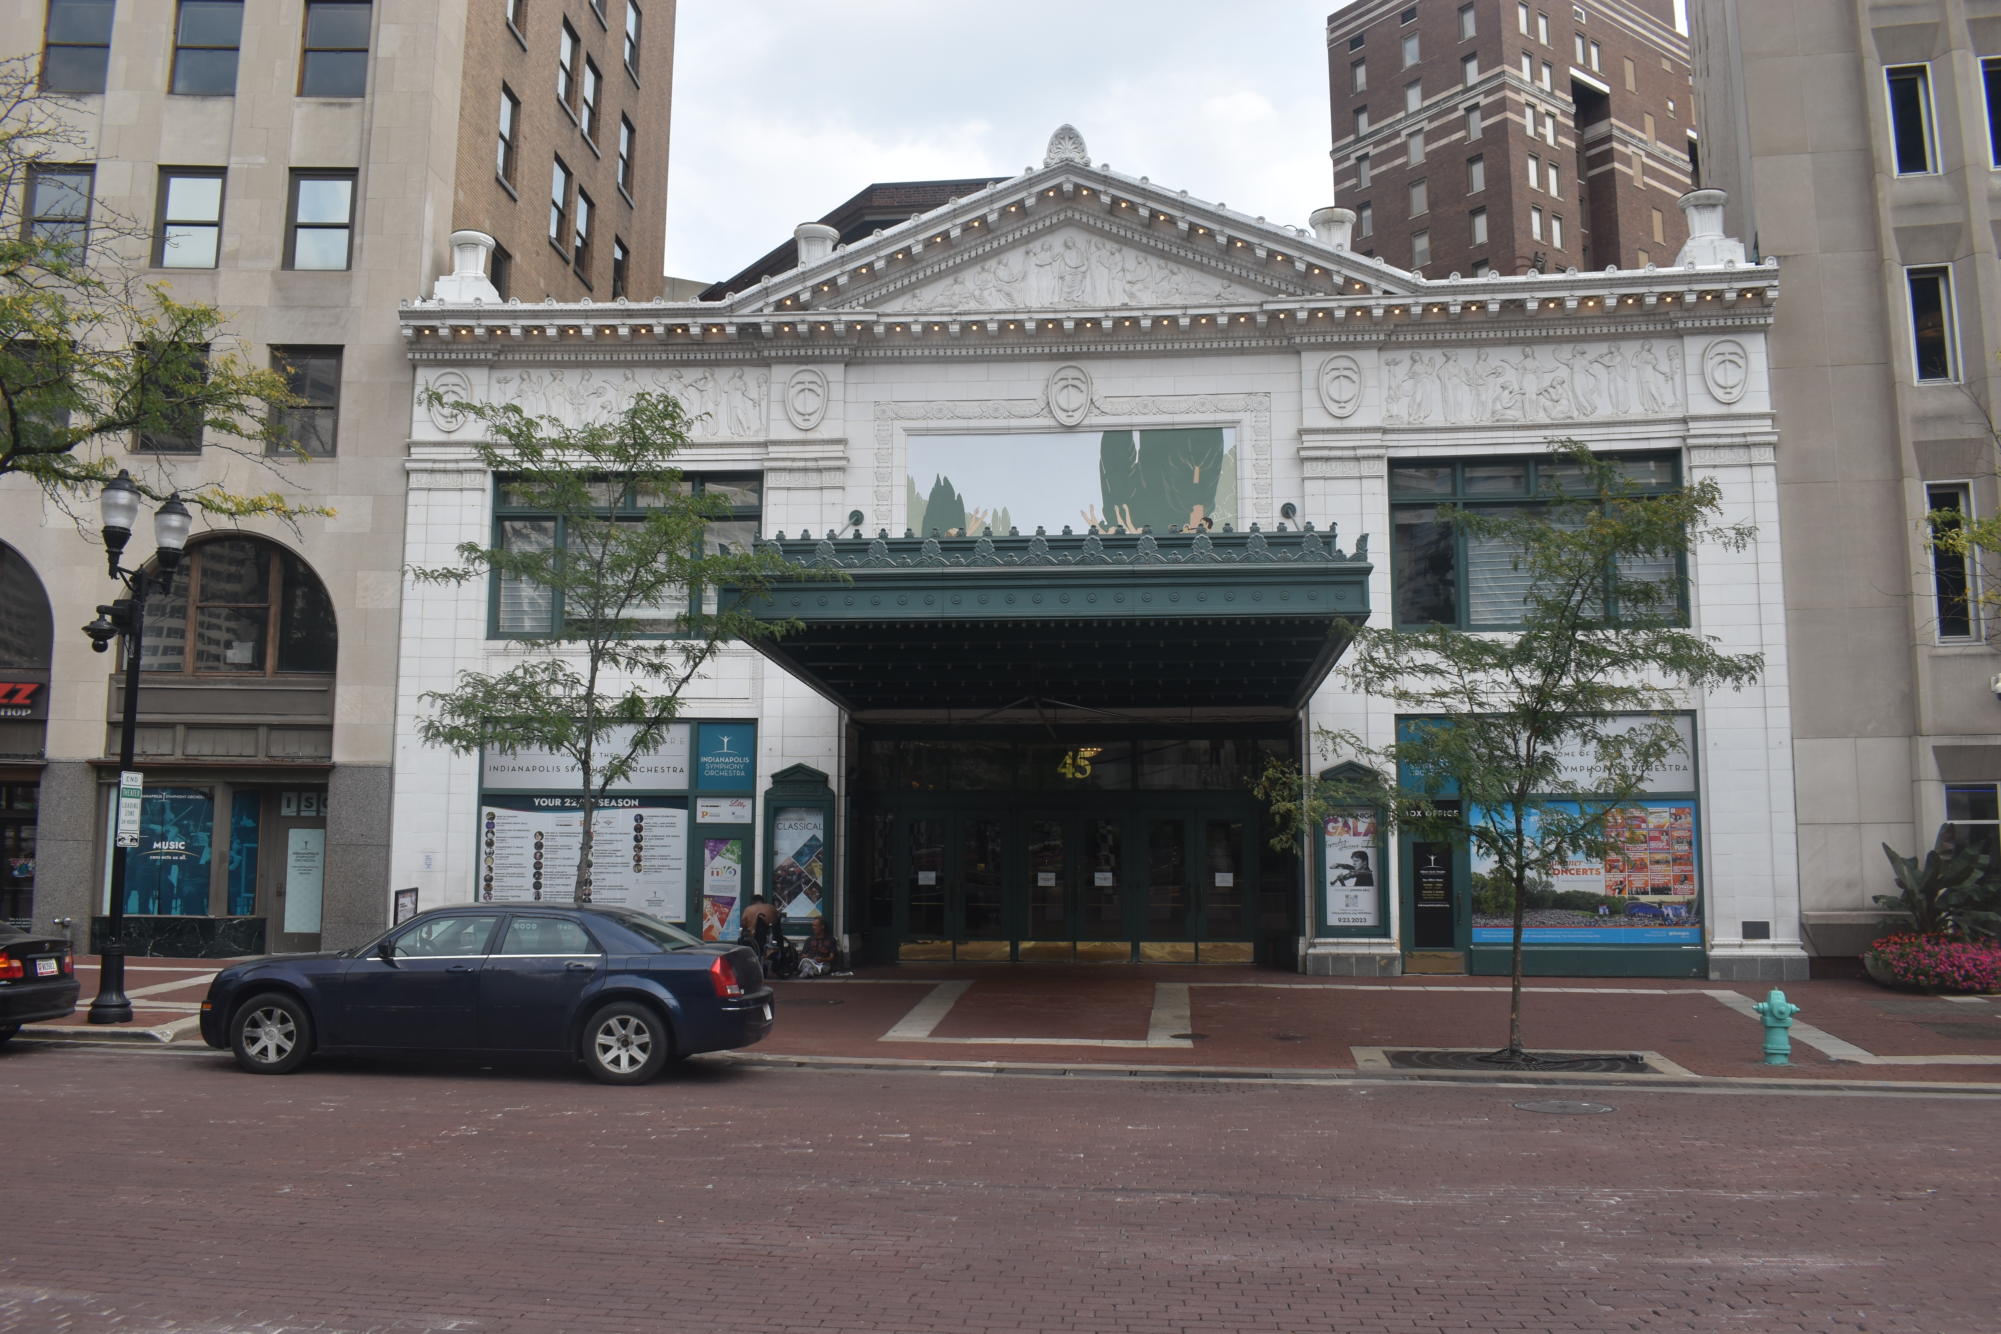 The Hilbert Circle Theatre is the home of the Indianapolis Symphony Orchestra and where they perform all of their concerts and events. photo by Josiah Veen